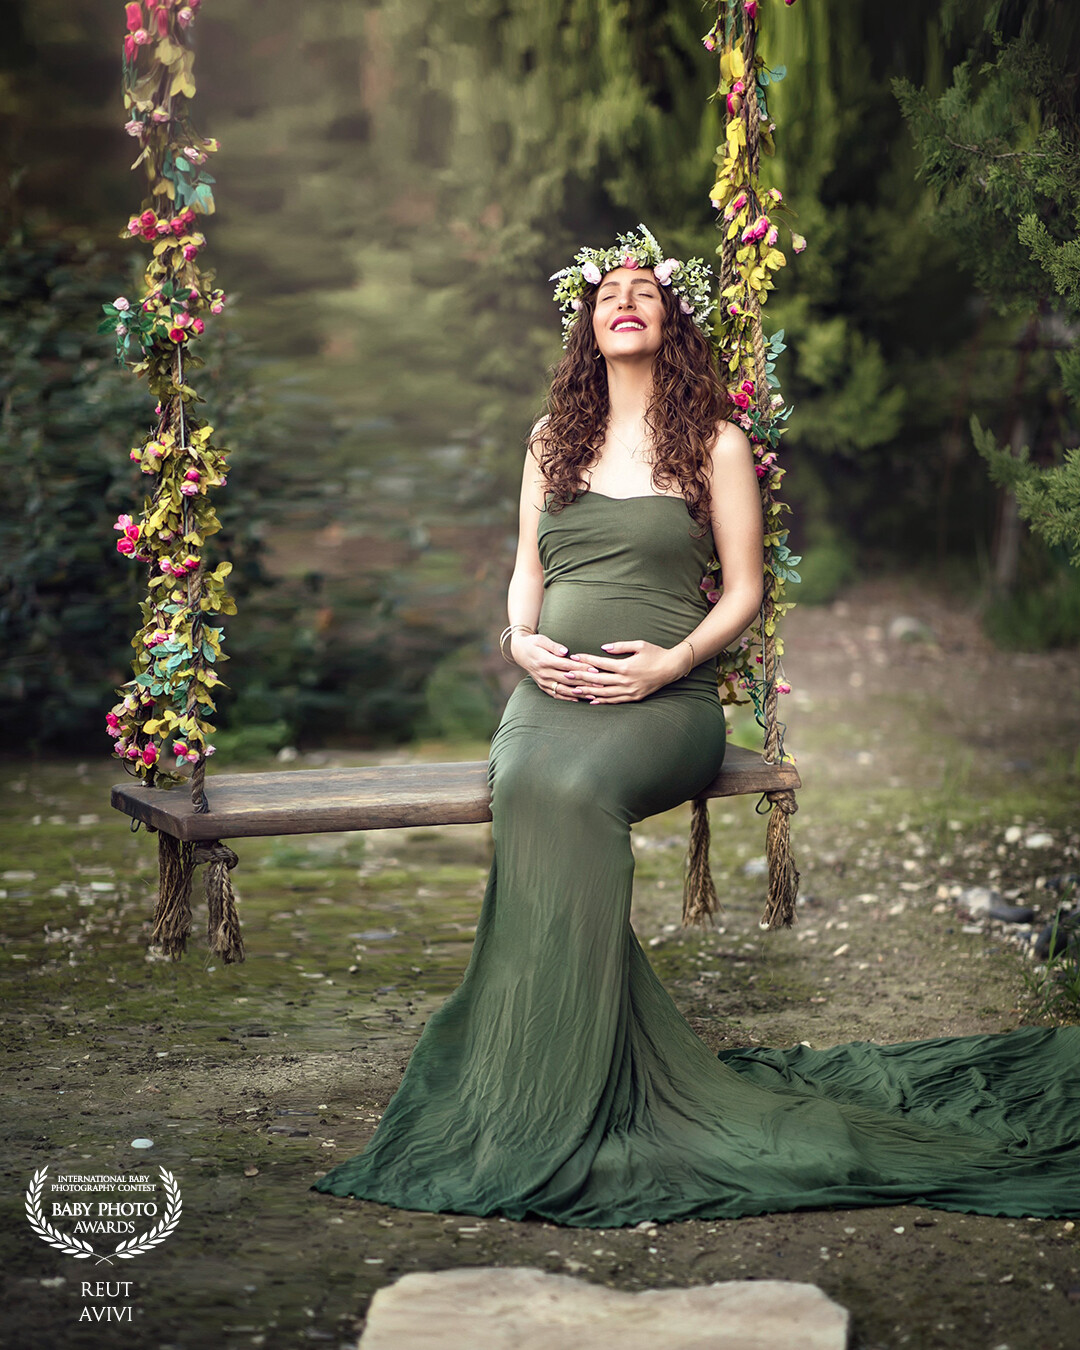 As she sat on the swing, the gentle breeze blew her face, revealing her glowing smile. The flowers adorned the swing, adding to the serenity of the moment. She rubbed her pregnant belly, feeling the life growing inside her, and whispered a prayer of gratitude. The green dress complemented the surrounding nature, making her stand out as the beautiful mother-to-be that she was.